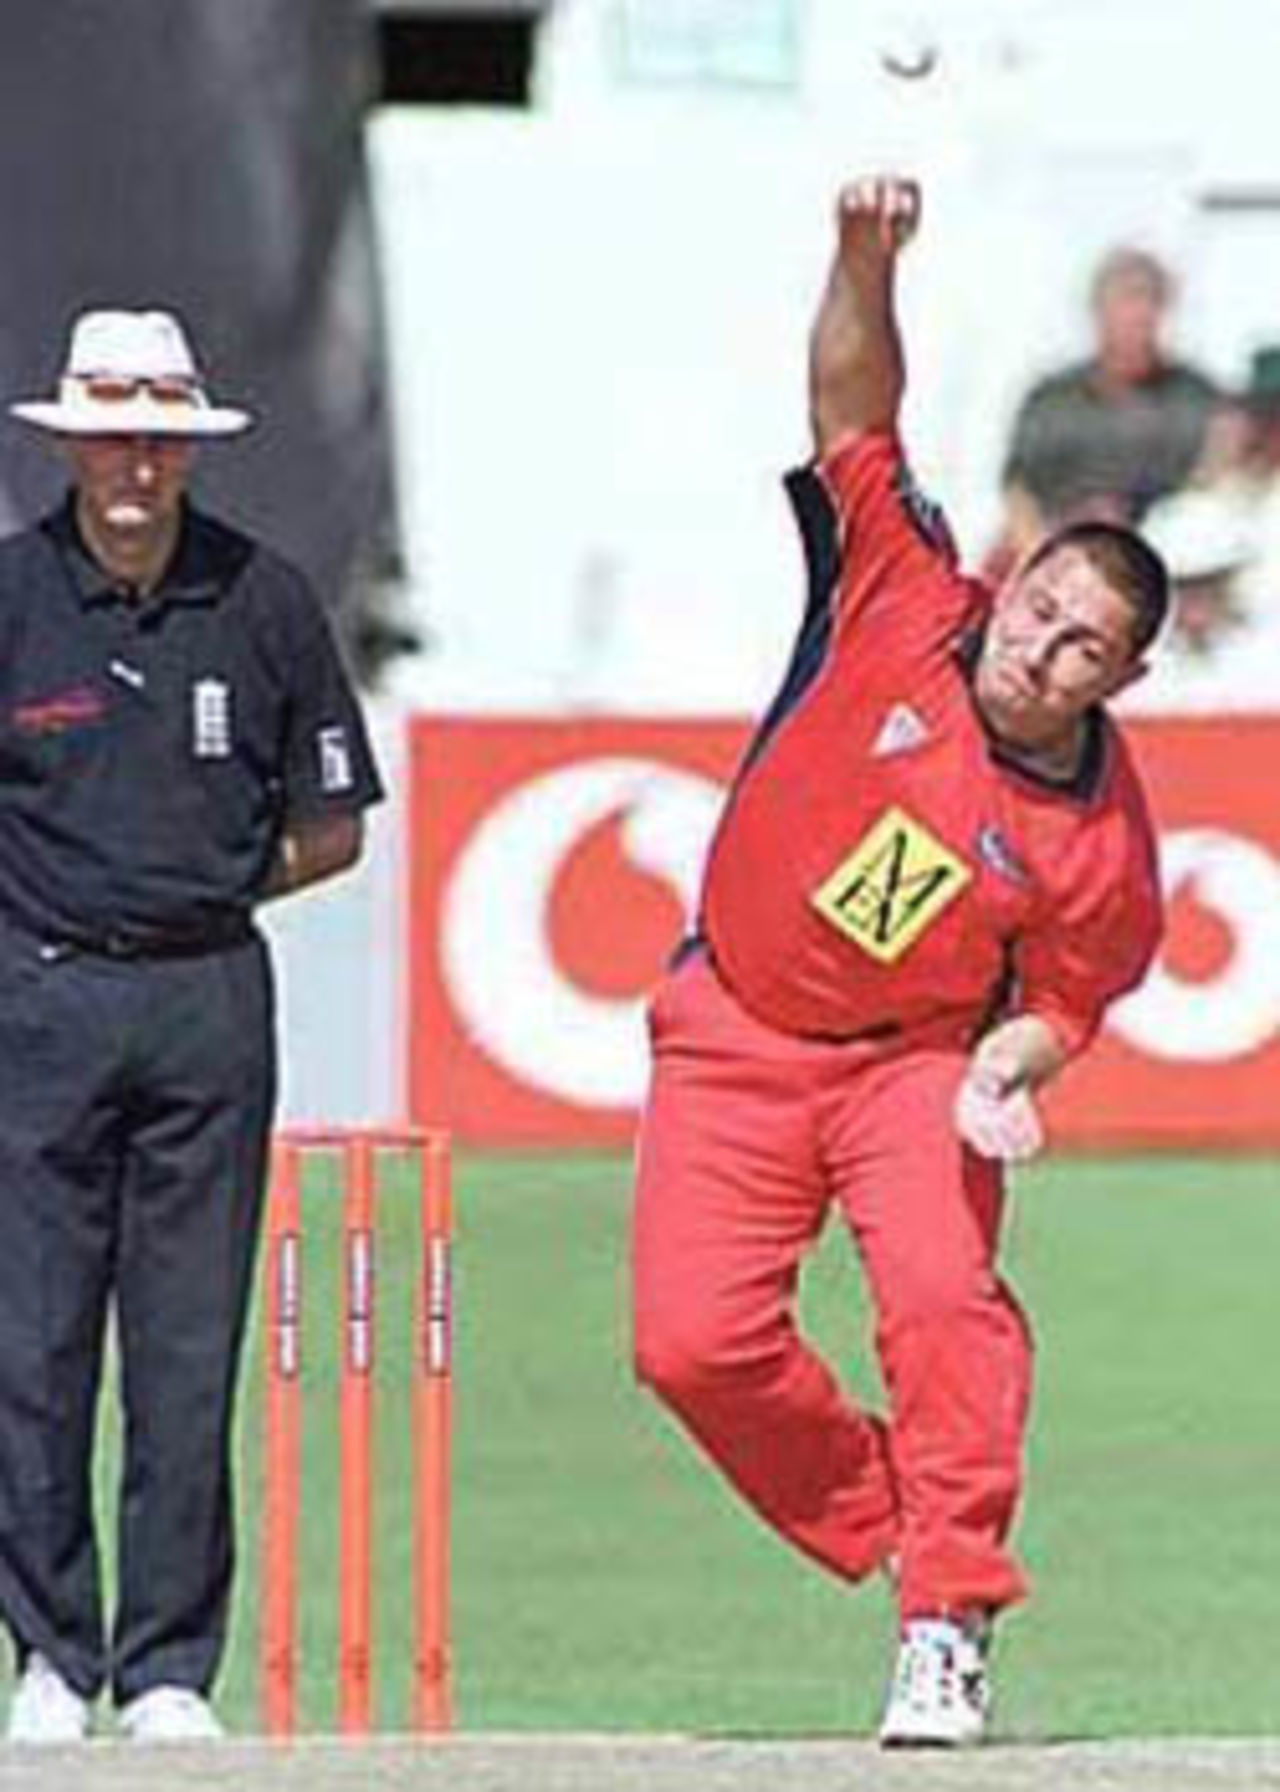 Ian Austin bowls, National League Division One, 2000, Worcestershire v Lancashire, County Ground, New Road, Worcester, 3 September 2000.